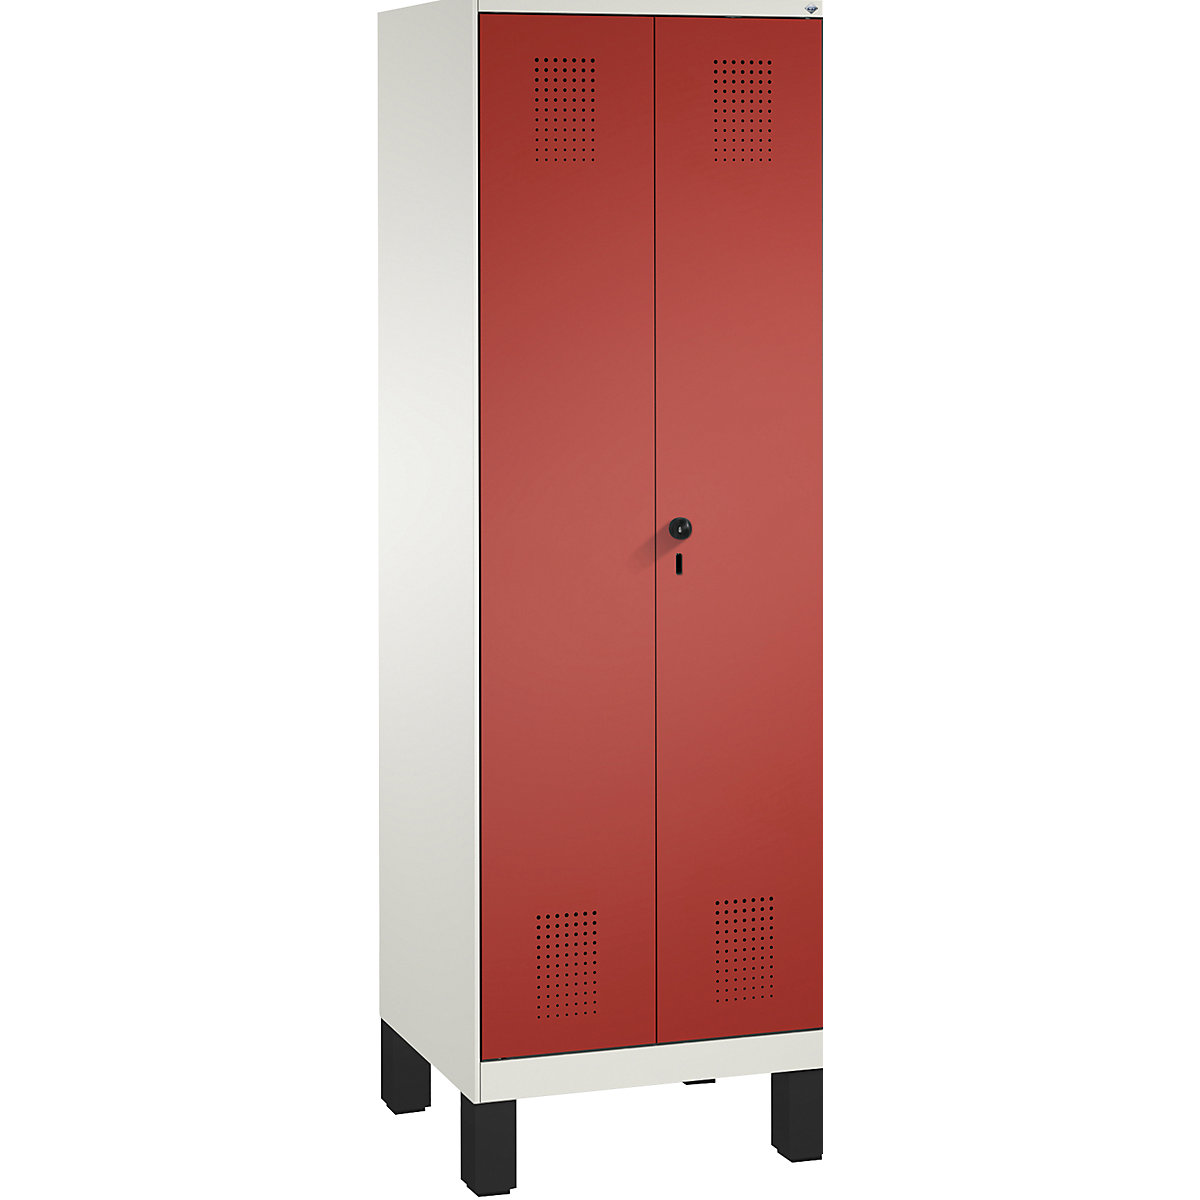 EVOLO laundry cupboard / cloakroom locker – C+P, 4 shelves, clothes rail, compartments 2 x 300 mm, with feet, traffic white / flame red-16